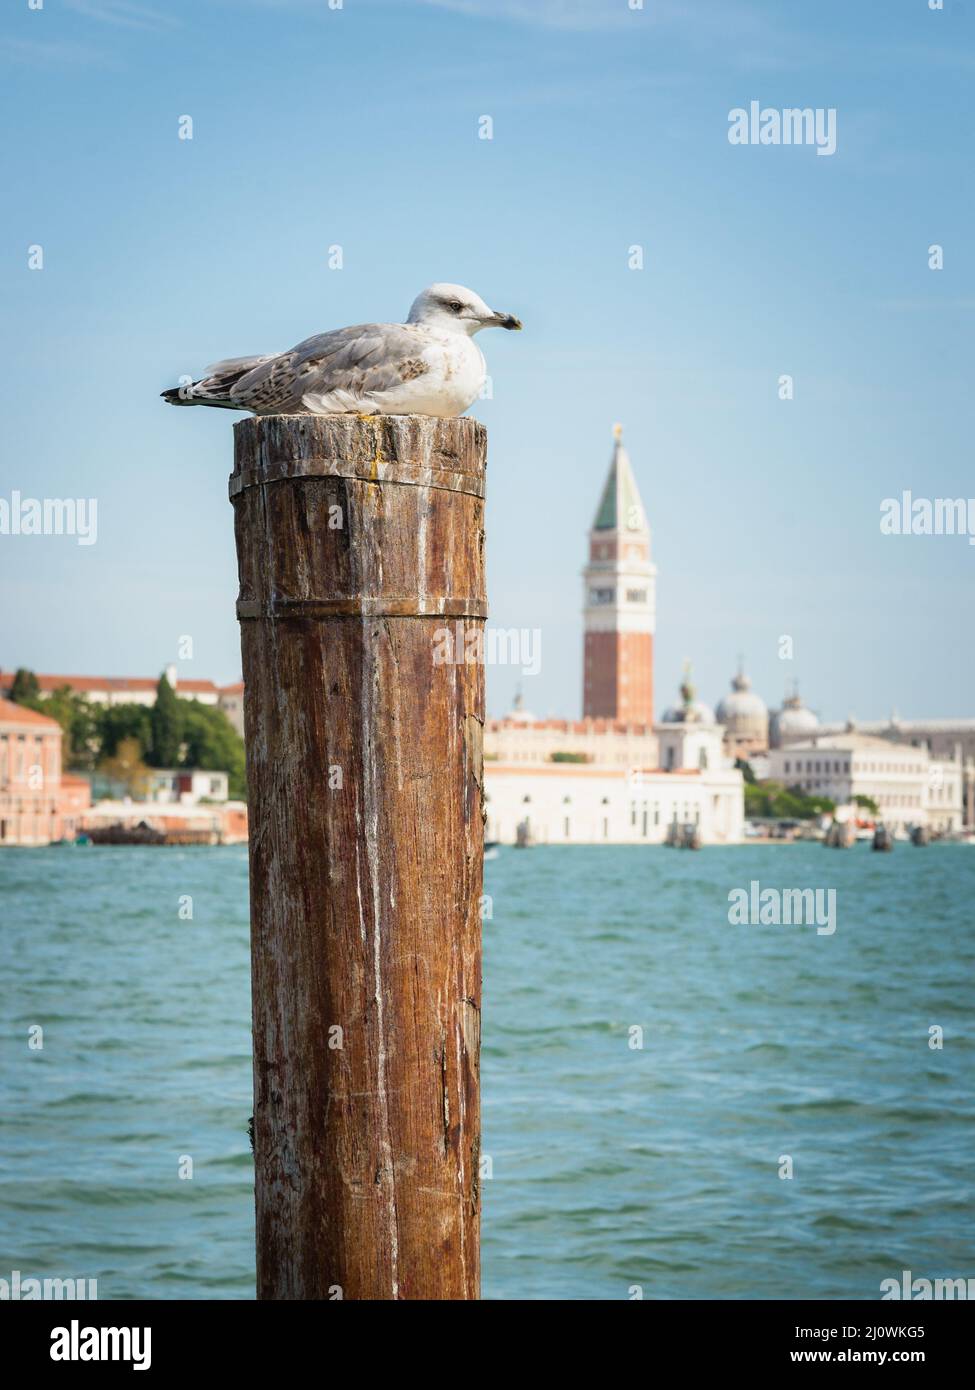 A seagull in front of the Venice lagoon with st Marc's square and the Doge's palace blurry in the background Stock Photo